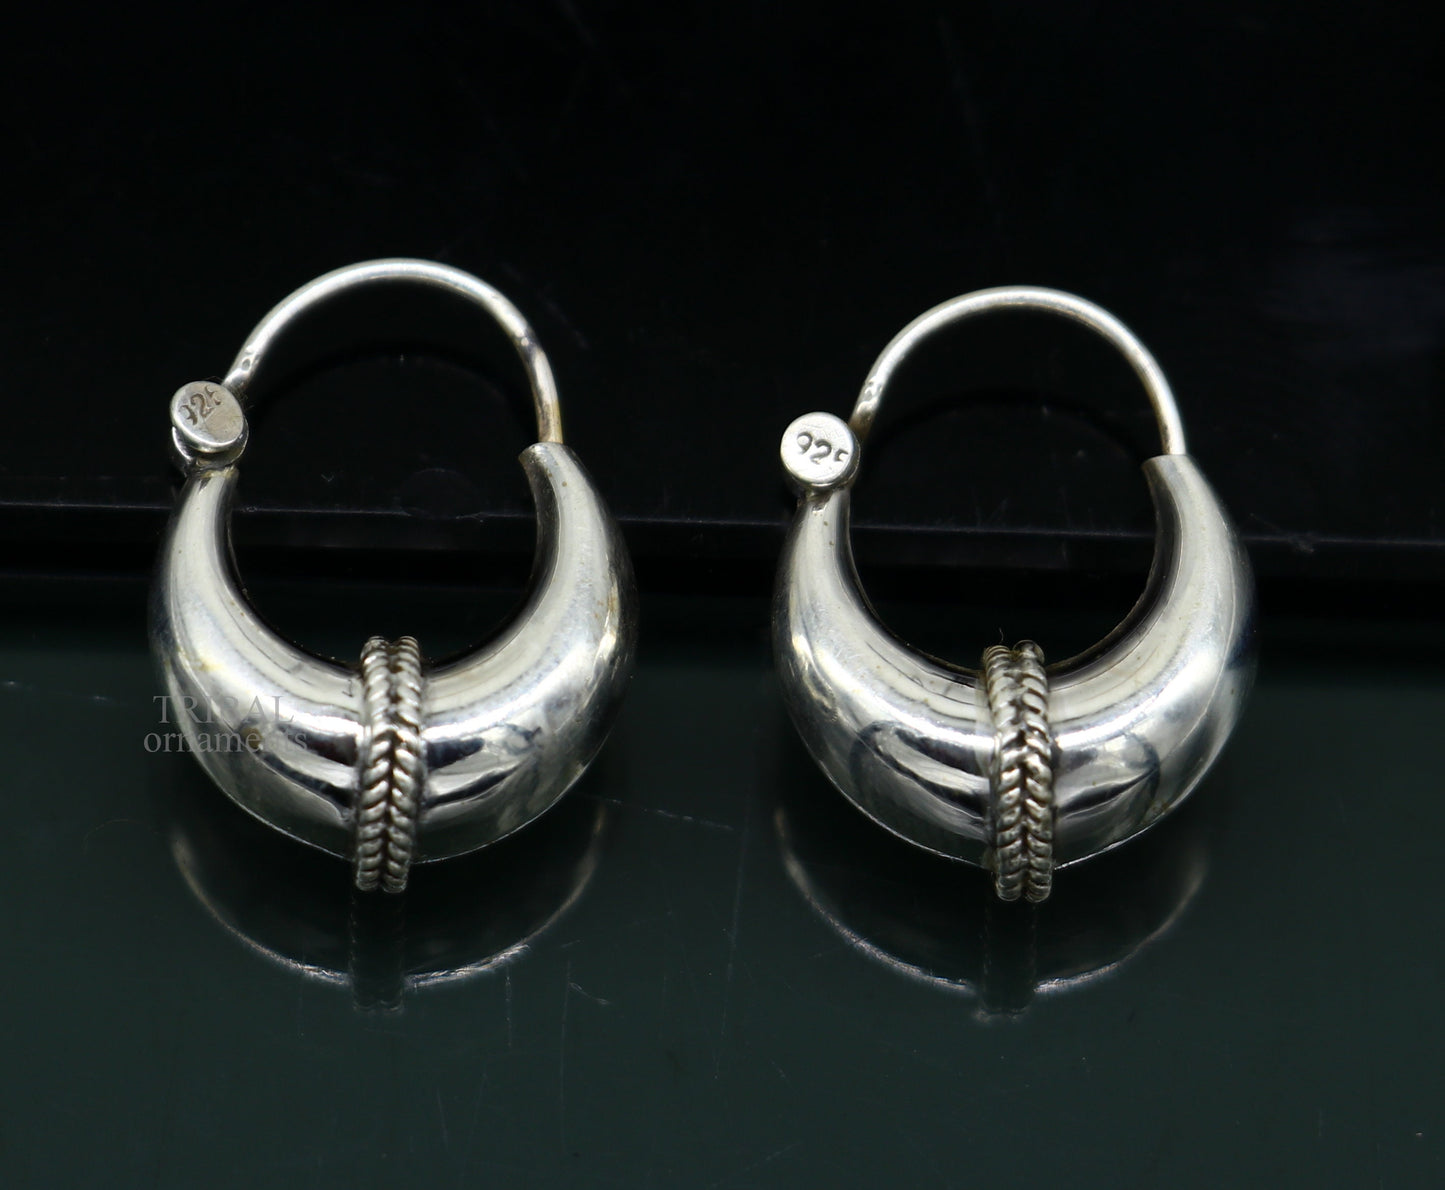 Exclusive 925 sterling silver Handmade vintage ethnic style hoops earrings Kundal unisex tribal stylish unique Bali jewelry India ear1230 - TRIBAL ORNAMENTS